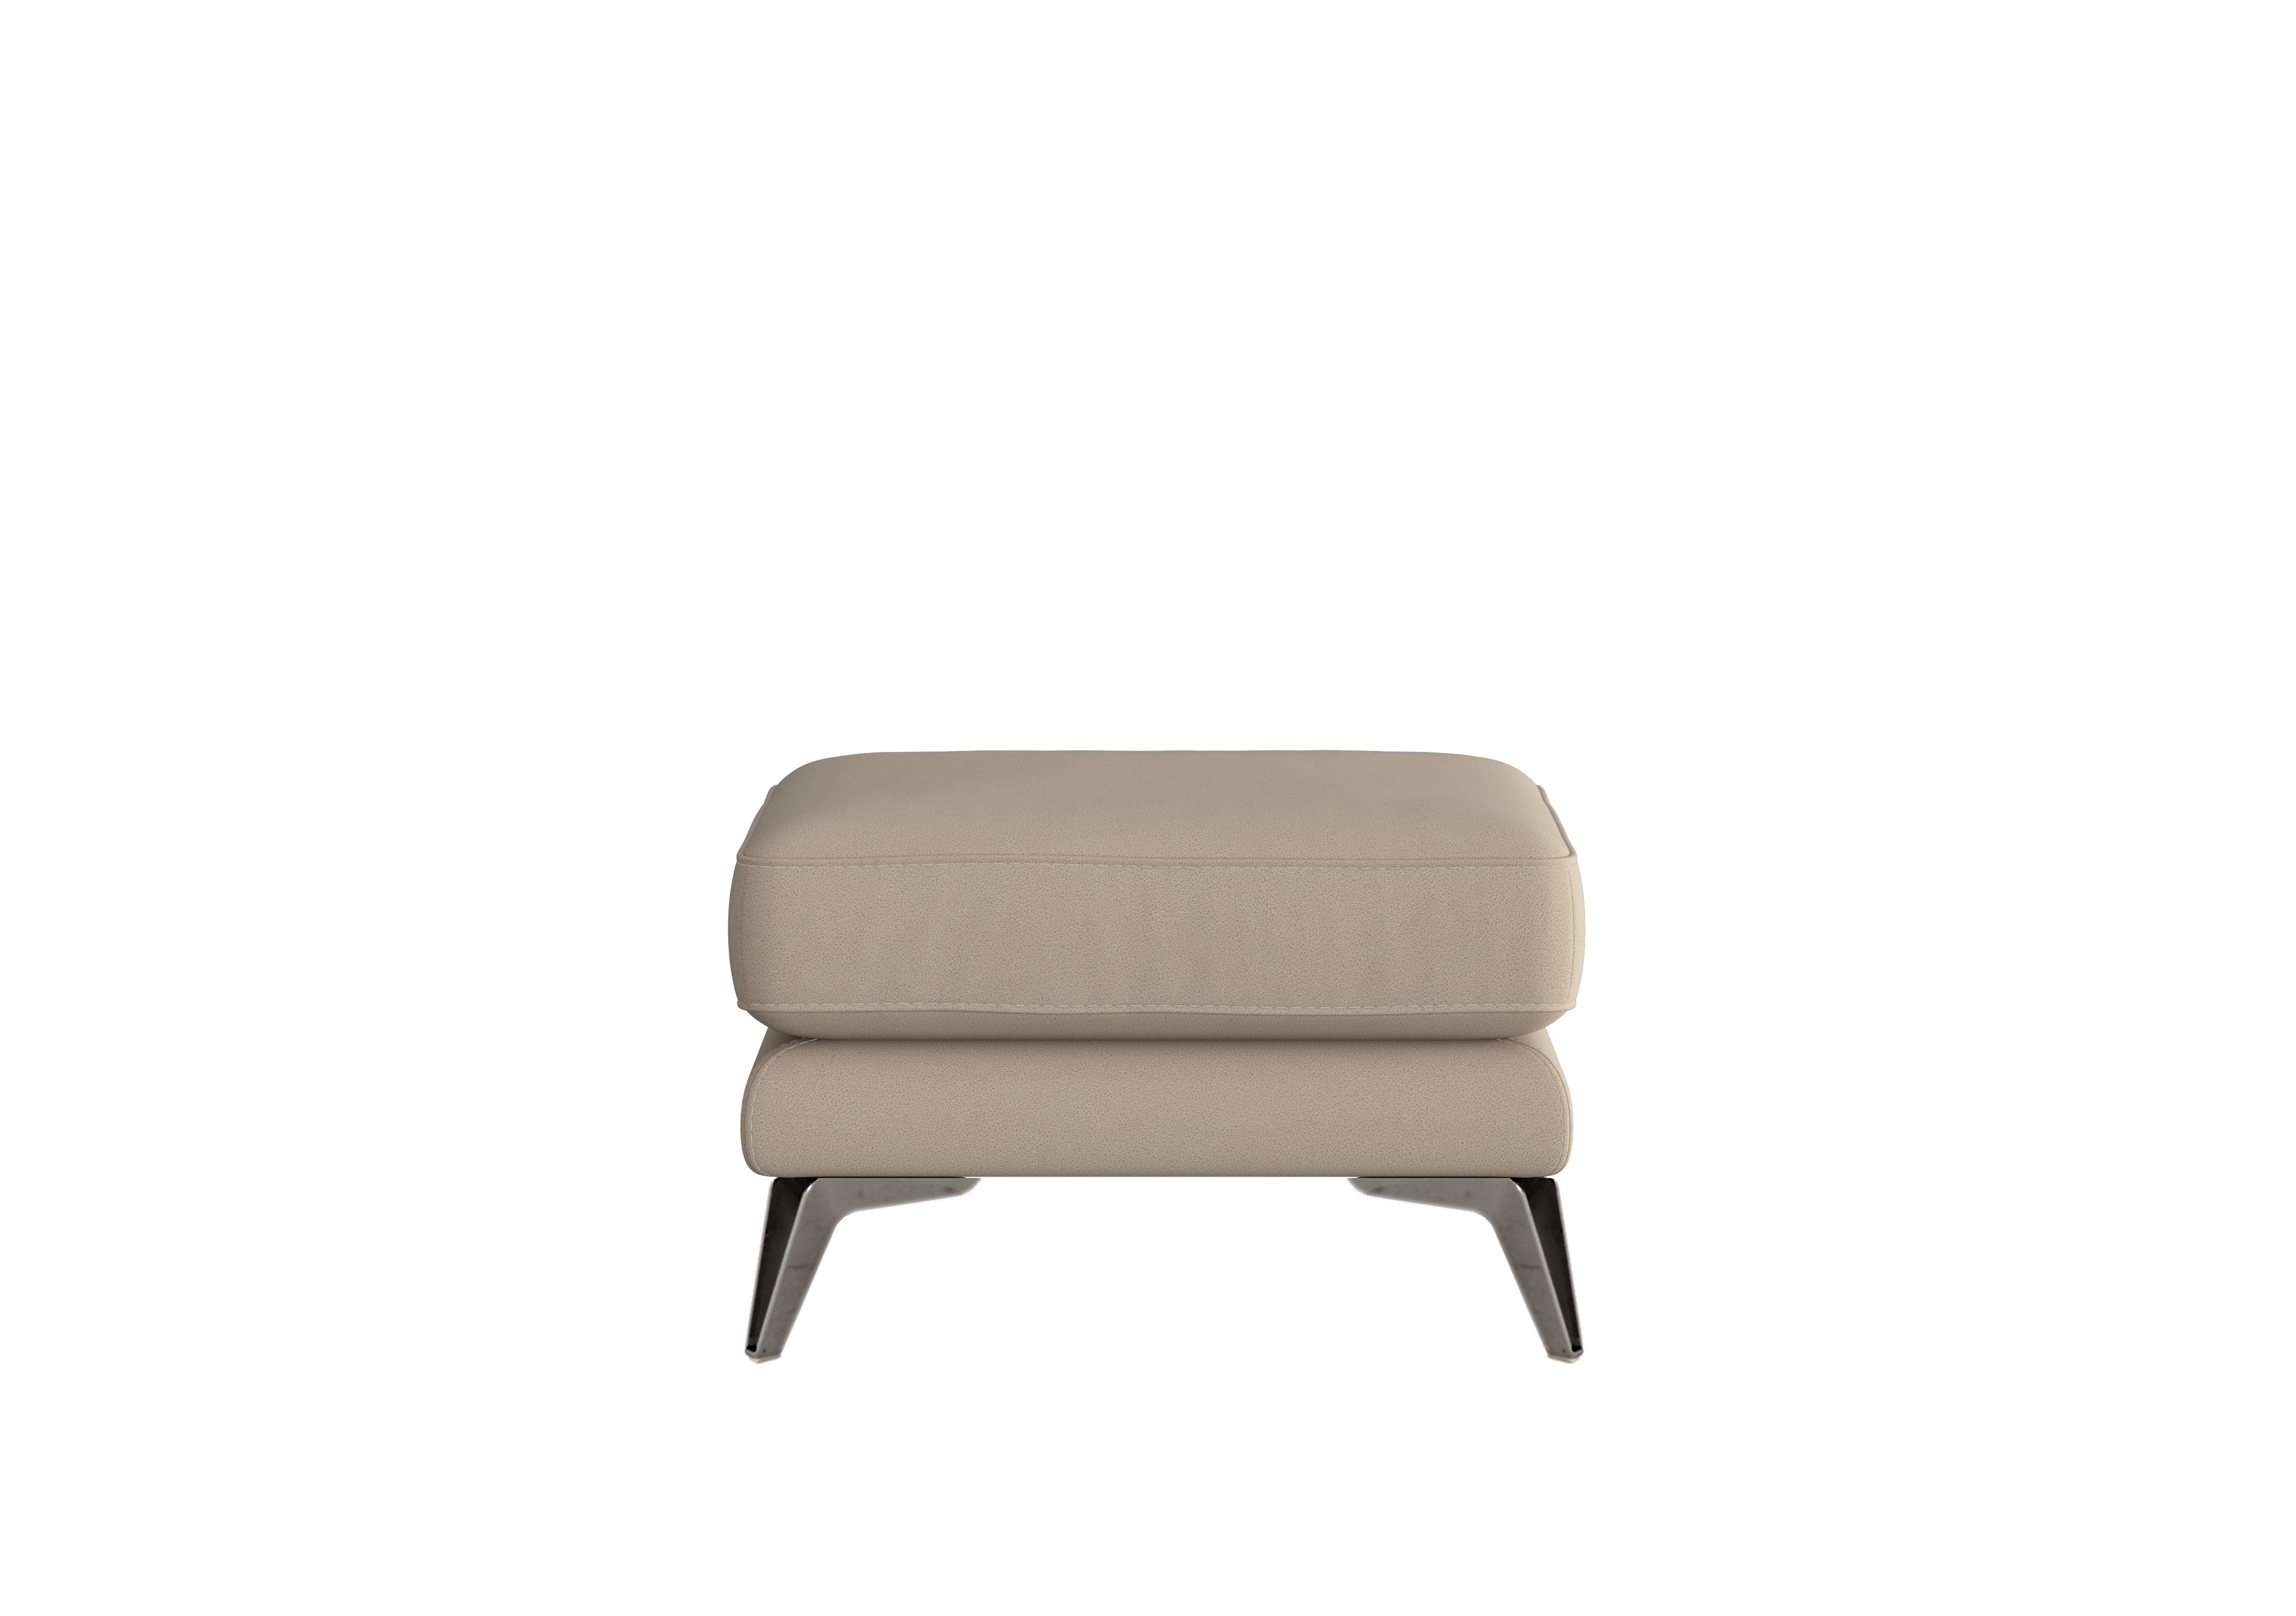 Contempo Fabric Footstool in Bfa-Blj-R20 Bisque on Furniture Village